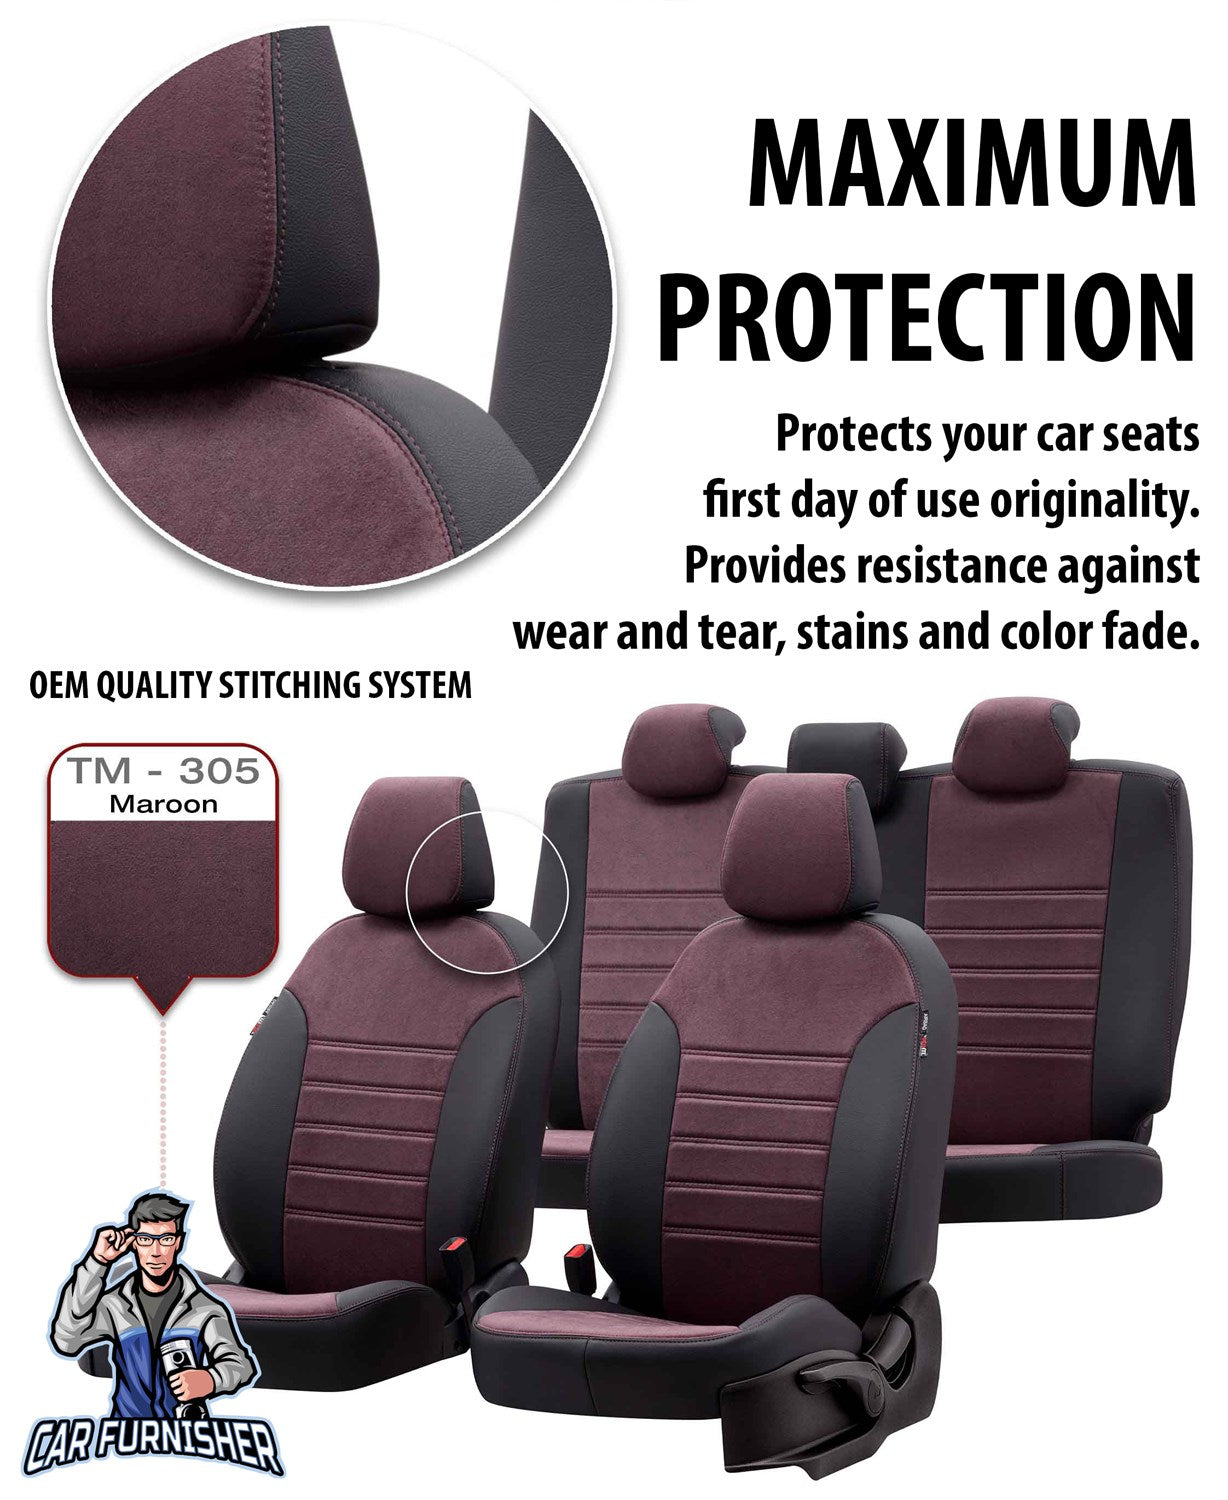 Toyota Camry Seat Cover Milano Suede Design Burgundy Leather & Suede Fabric